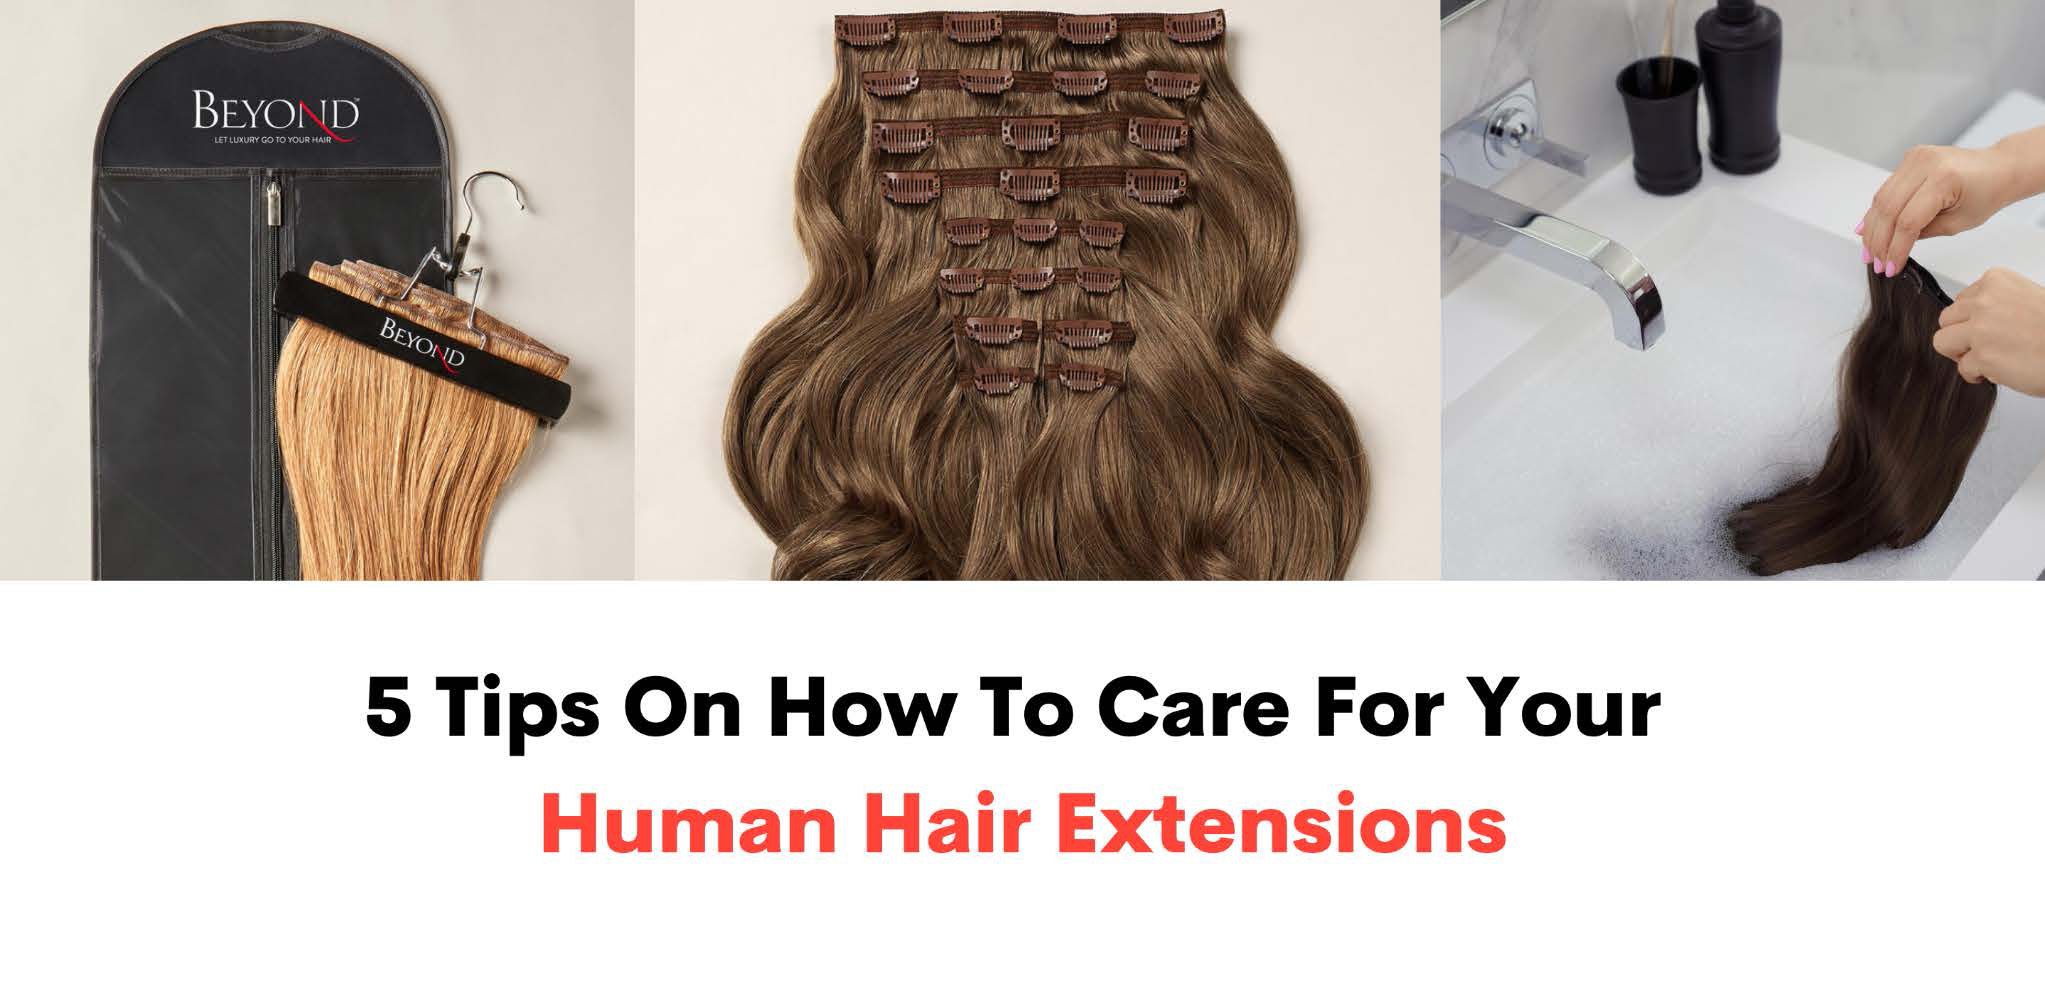 5 Tips On How To Care For Your Human Hair Extensions